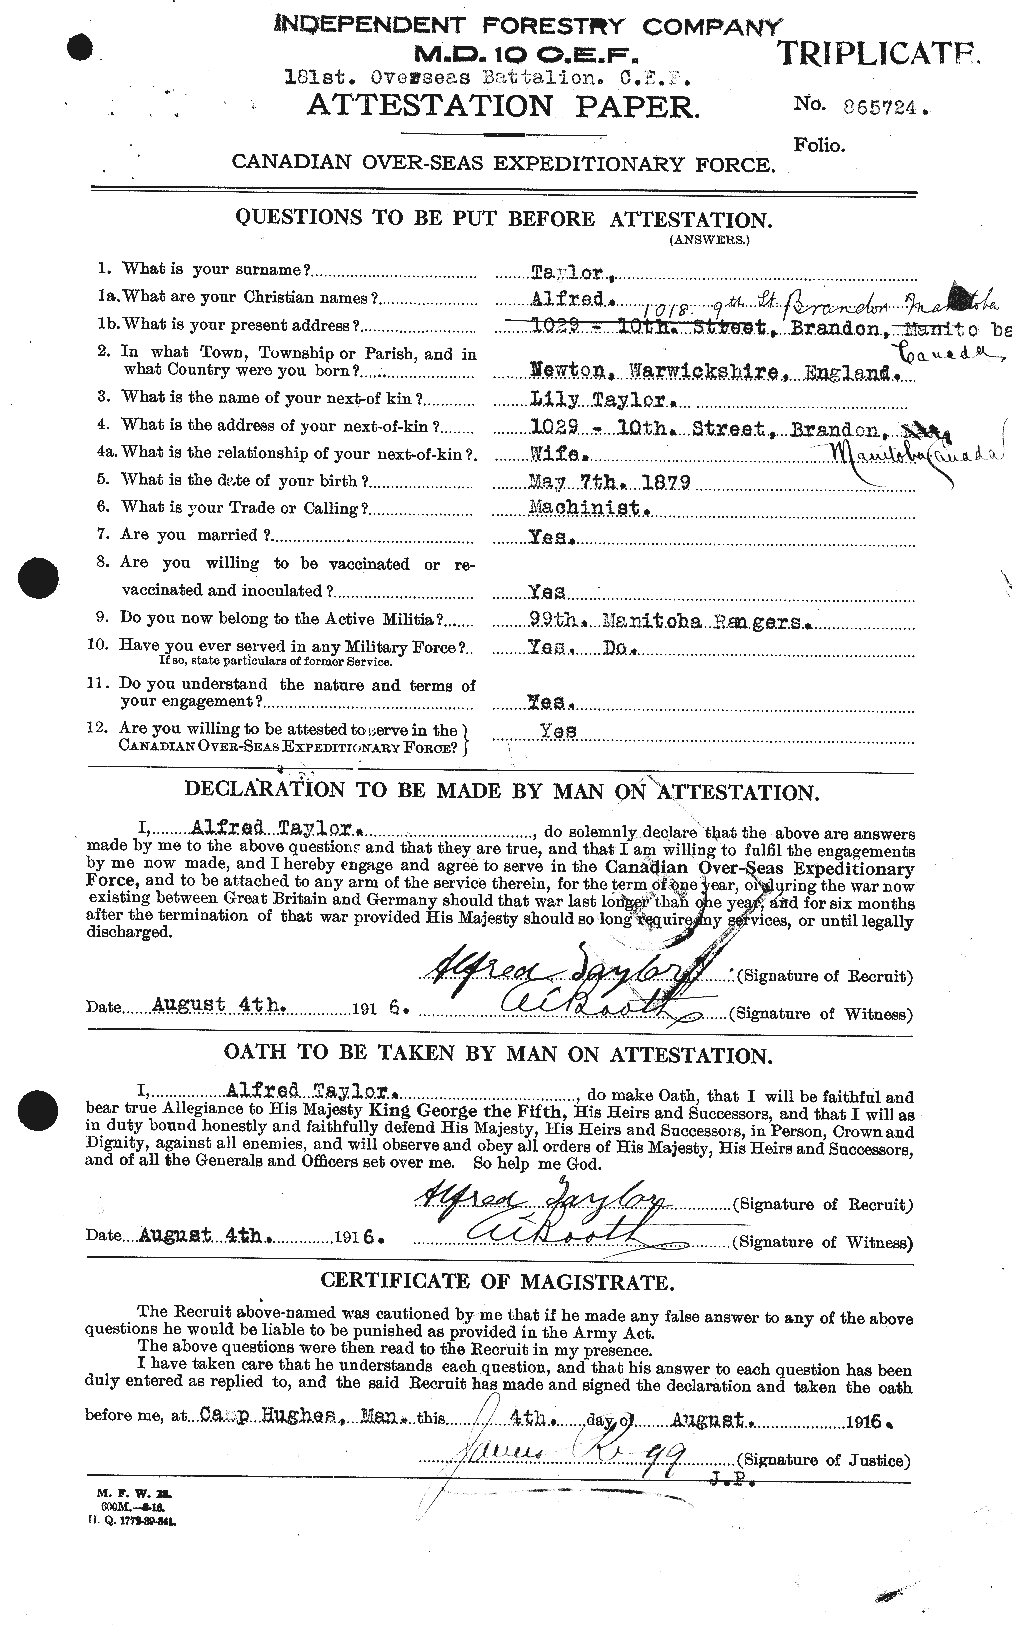 Personnel Records of the First World War - CEF 626161a